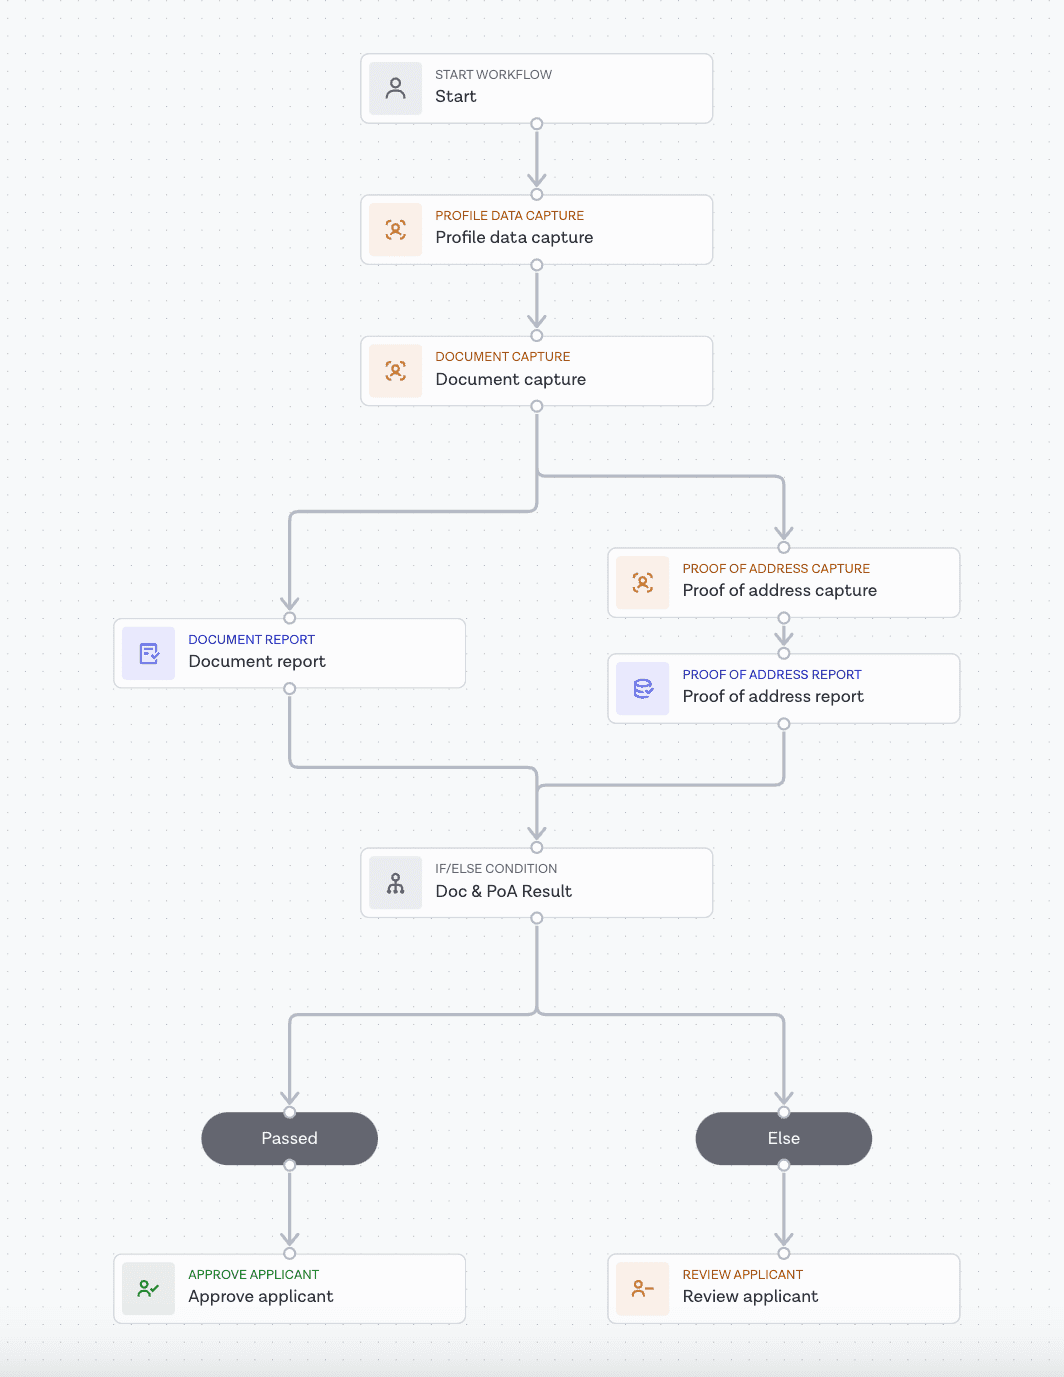 Proof of Address workflow